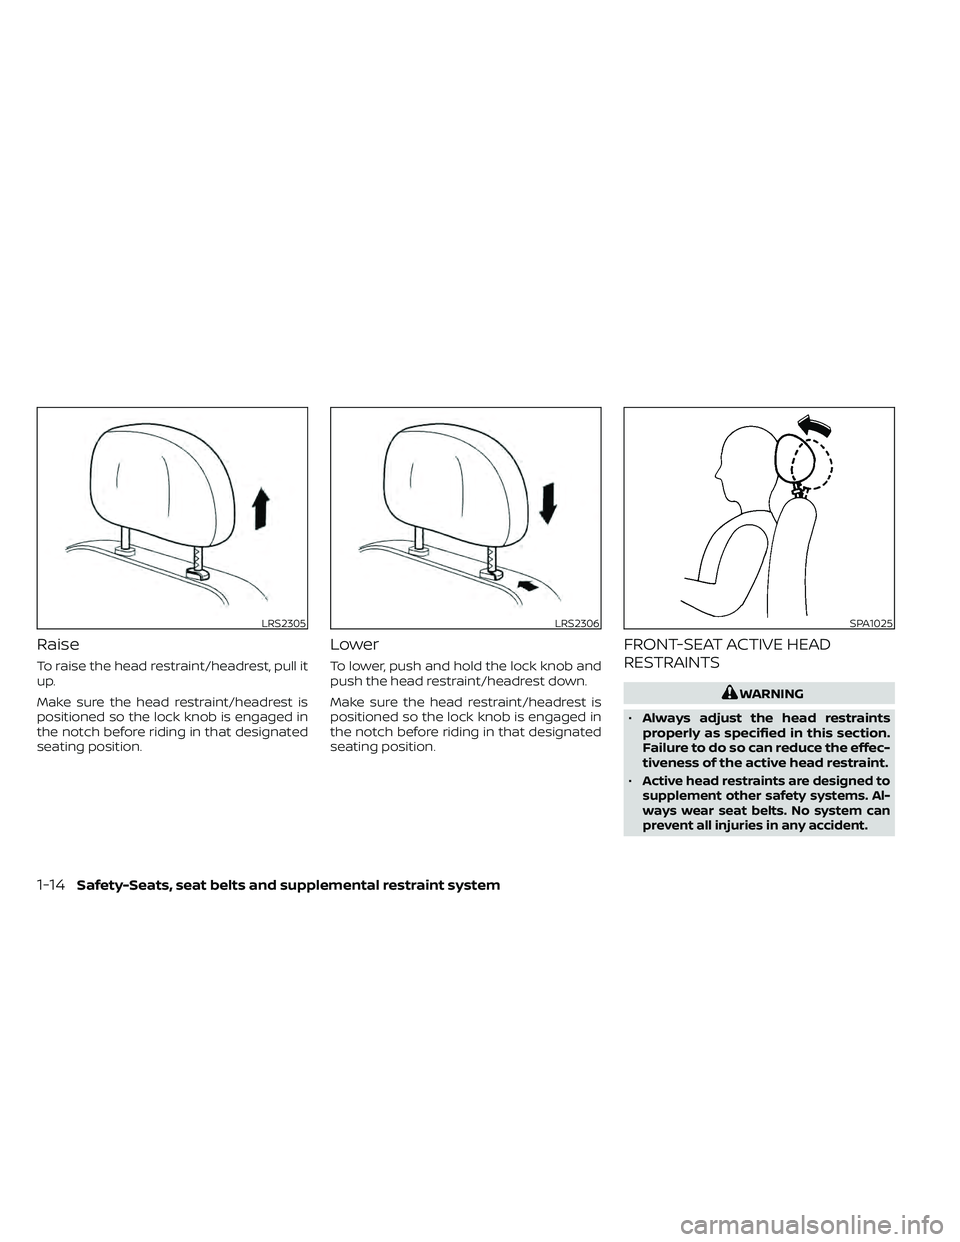 NISSAN FRONTIER 2020  Owner´s Manual Raise
To raise the head restraint/headrest, pull it
up.
Make sure the head restraint/headrest is
positioned so the lock knob is engaged in
the notch before riding in that designated
seating position.
